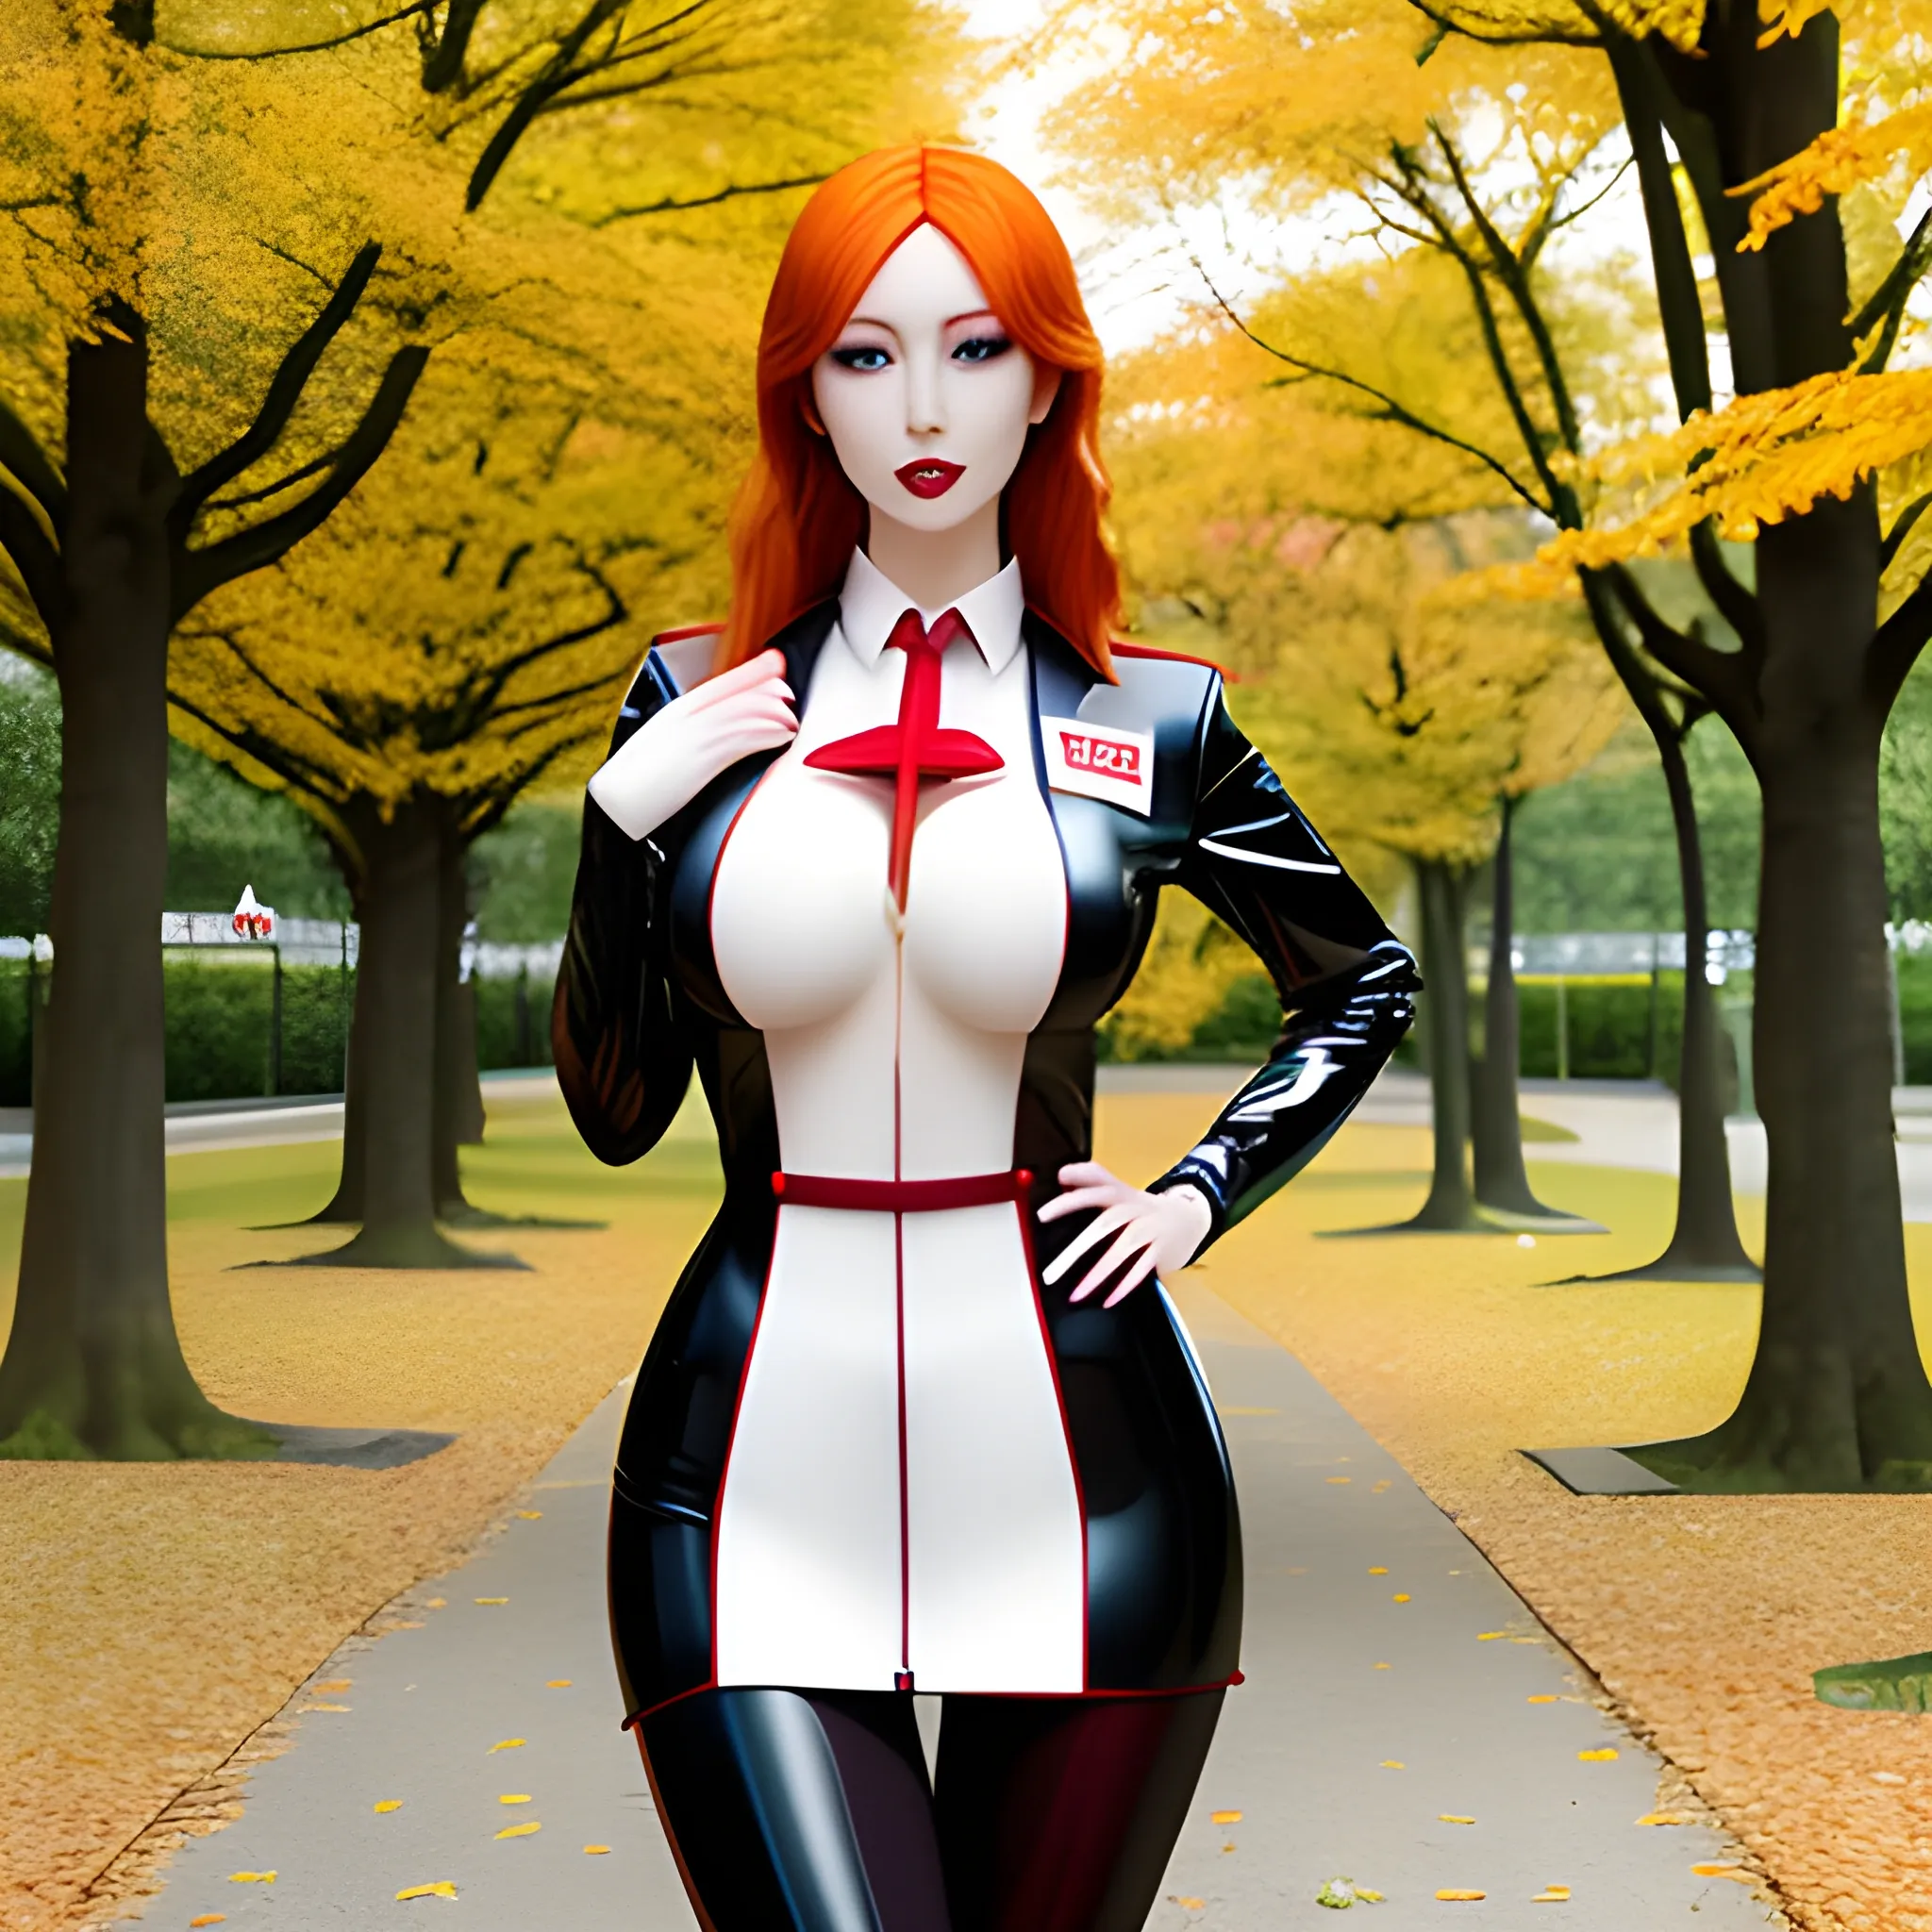 create a photorealistic image of a red-haired female child wearing a Japanese latex school uniform standing in front of a playground. Pretty eyes, sexy mouth, whole body visible, lots of skin, maximum details.